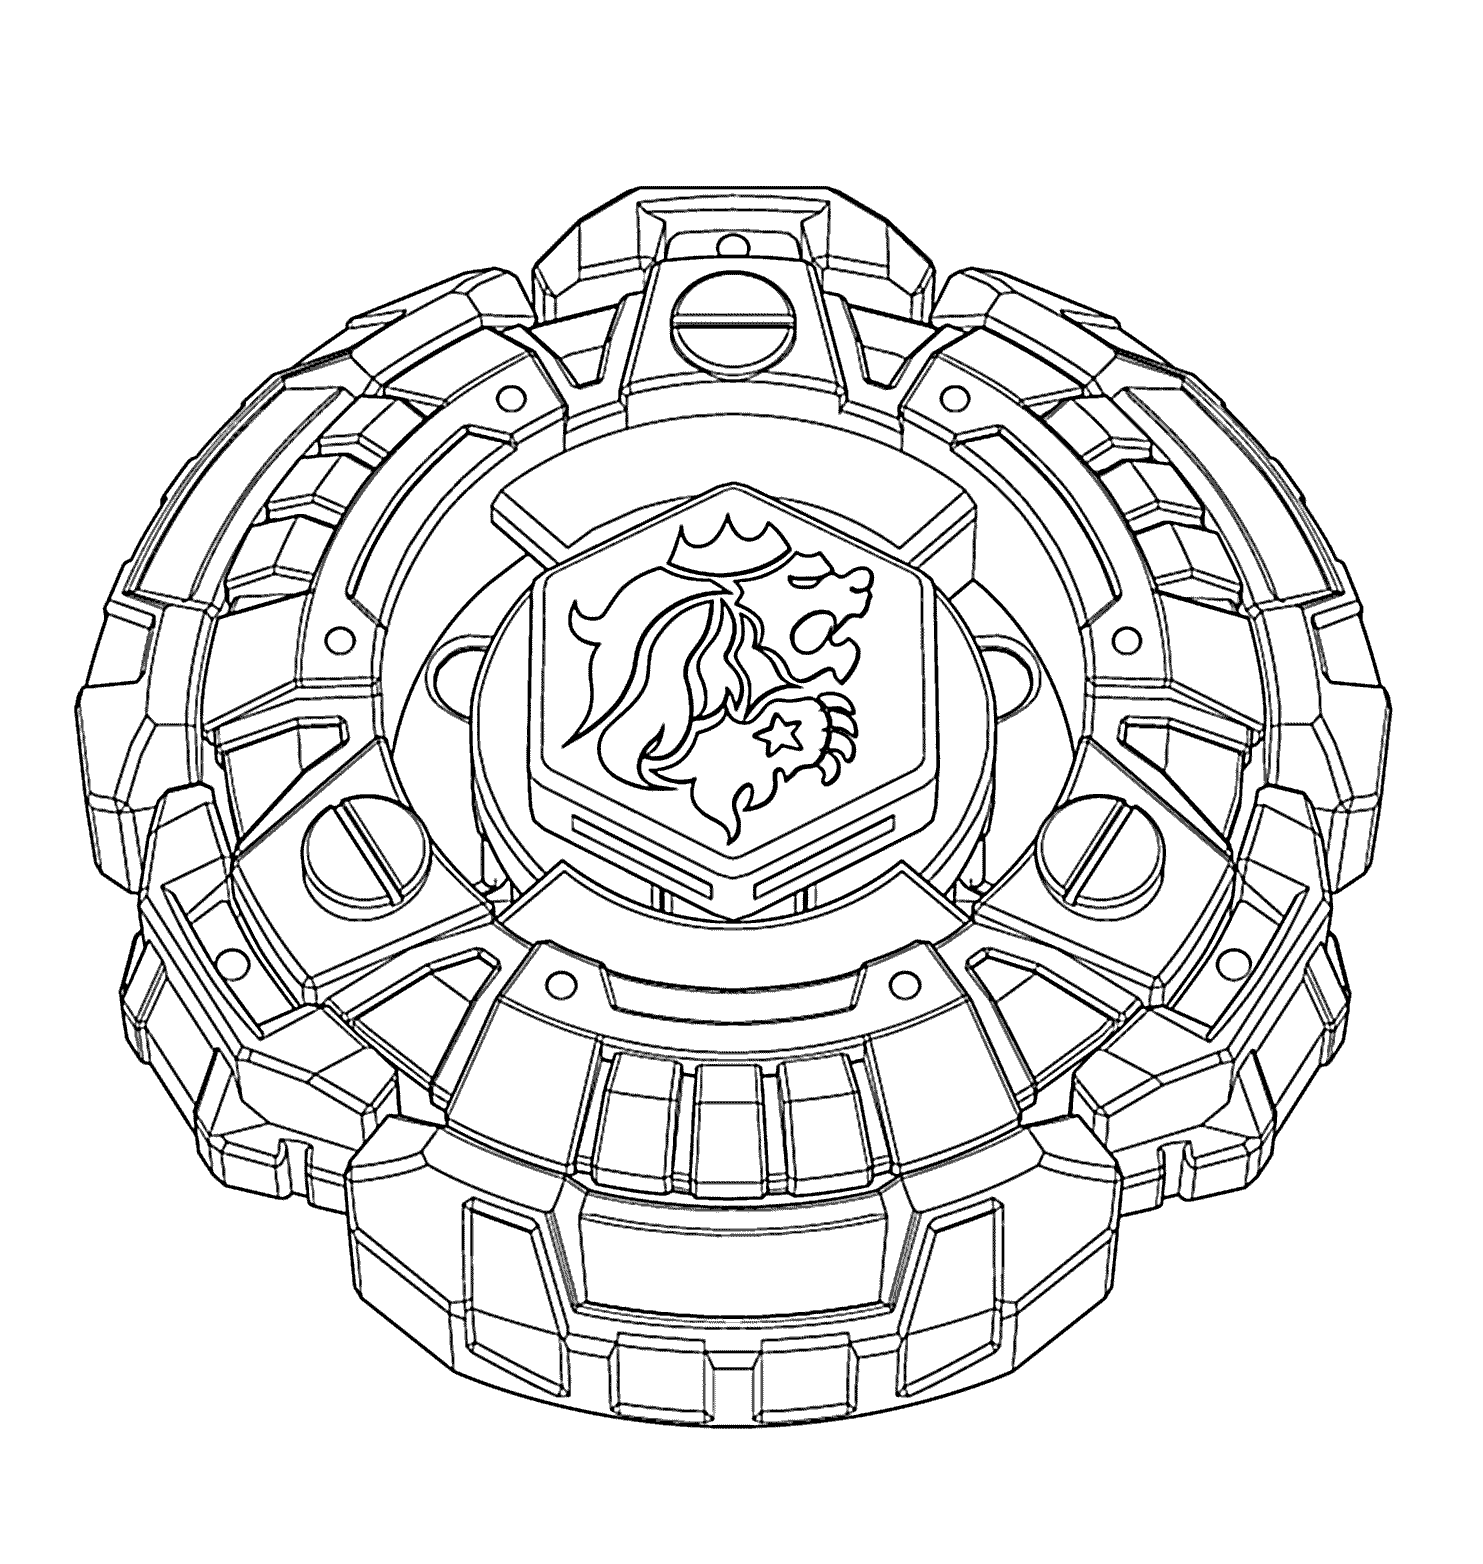 Beyblade Anime Coloring Pages For Kids Printable Free Coloring Pages For Kids Colorin